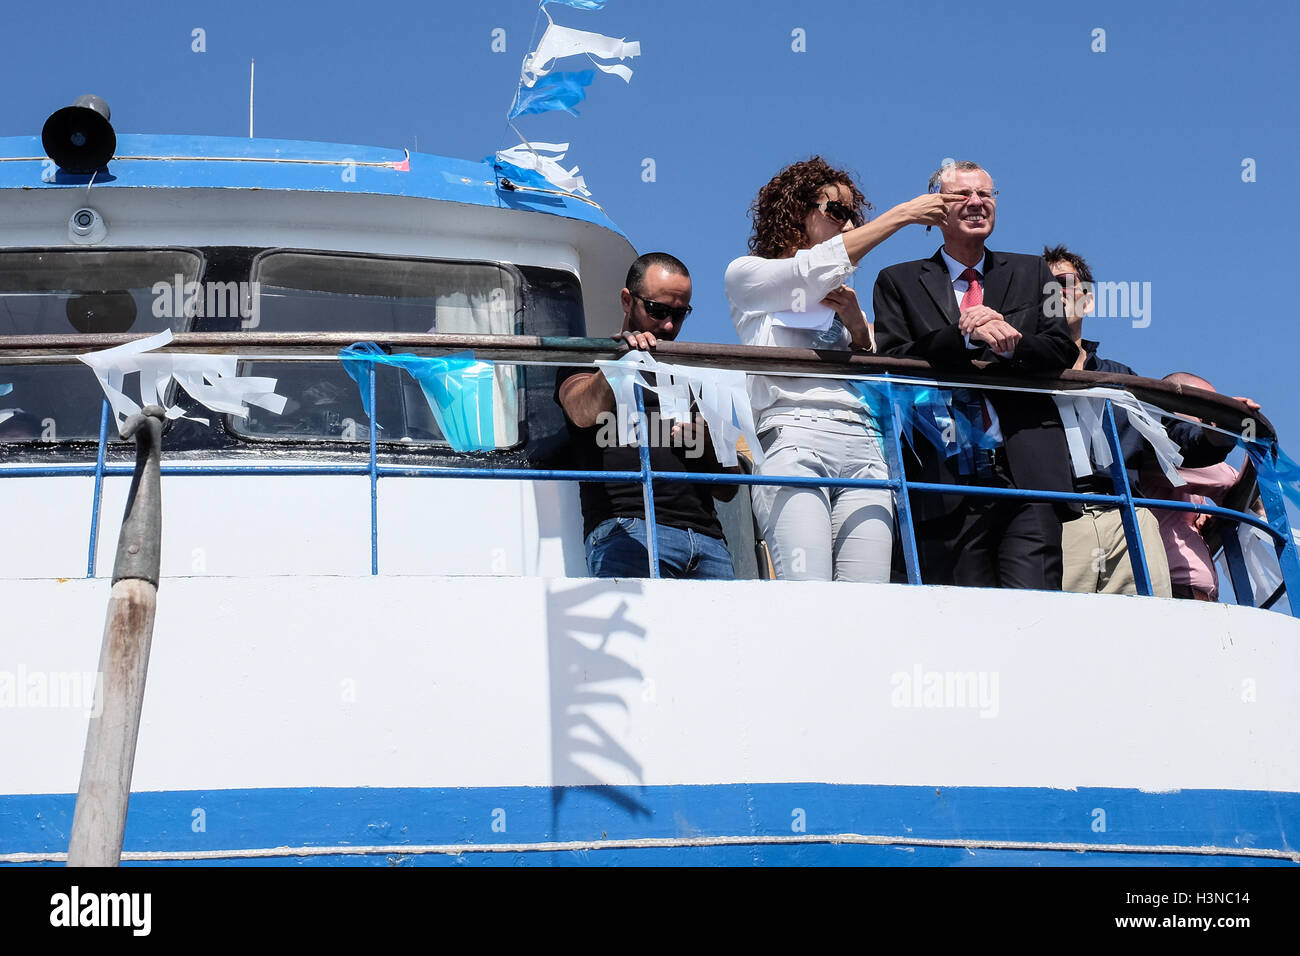 Acre, Israel. 10th October, 2016. A woman seems to be poking the eye of Israeli Tourism Minister YARIV LEVIN on the top deck of the 'Acre Queen' as it concludes its inauguration cruise launching the Haifa-Acre pleasure cruise line at the Acre Marina. The line, which will run on a fixed timetable with several daily cruises, is aimed at domestic and international tourism offering views of the Carmel Mountains, downtown Haifa, along the coast, the colorful and authentic fishing port in Acre and the Acre Marina. Credit:  Nir Alon/Alamy Live News Stock Photo